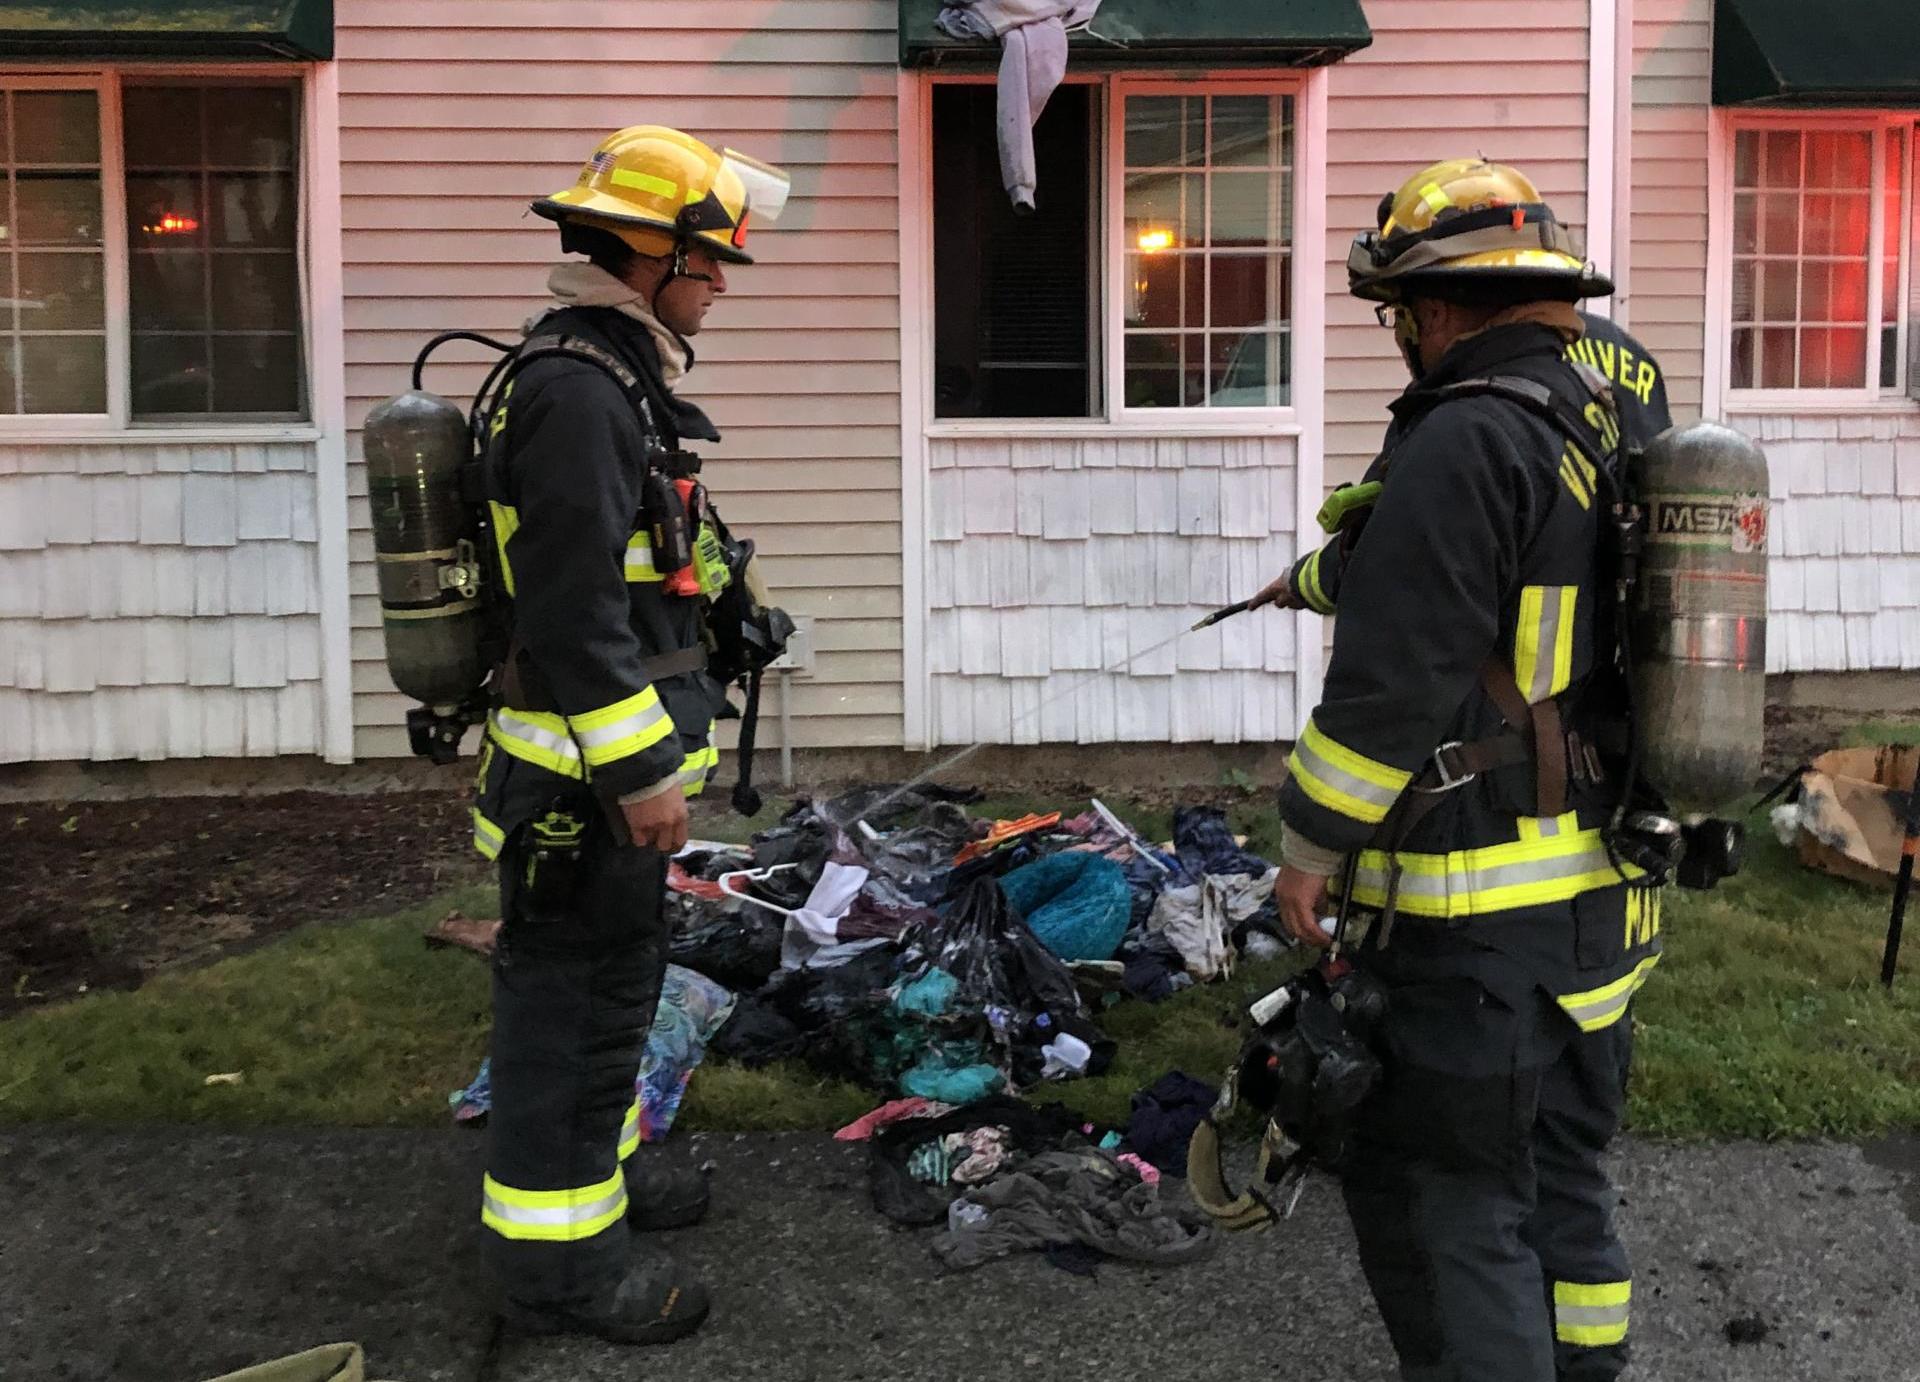 Vancouver firefighters wet down clothing that had caught fire in an apartment closet.